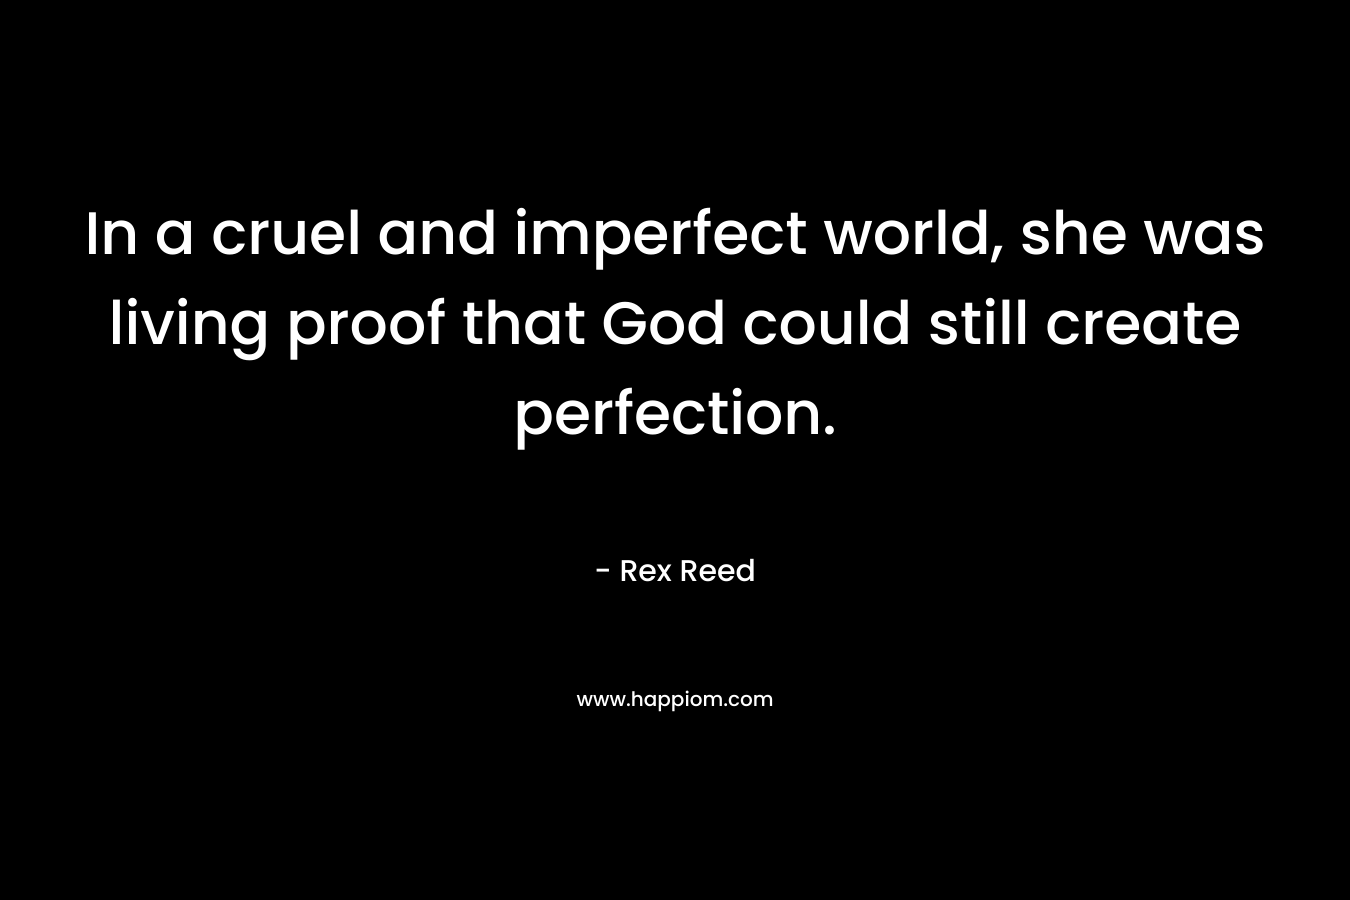 In a cruel and imperfect world, she was living proof that God could still create perfection. – Rex Reed